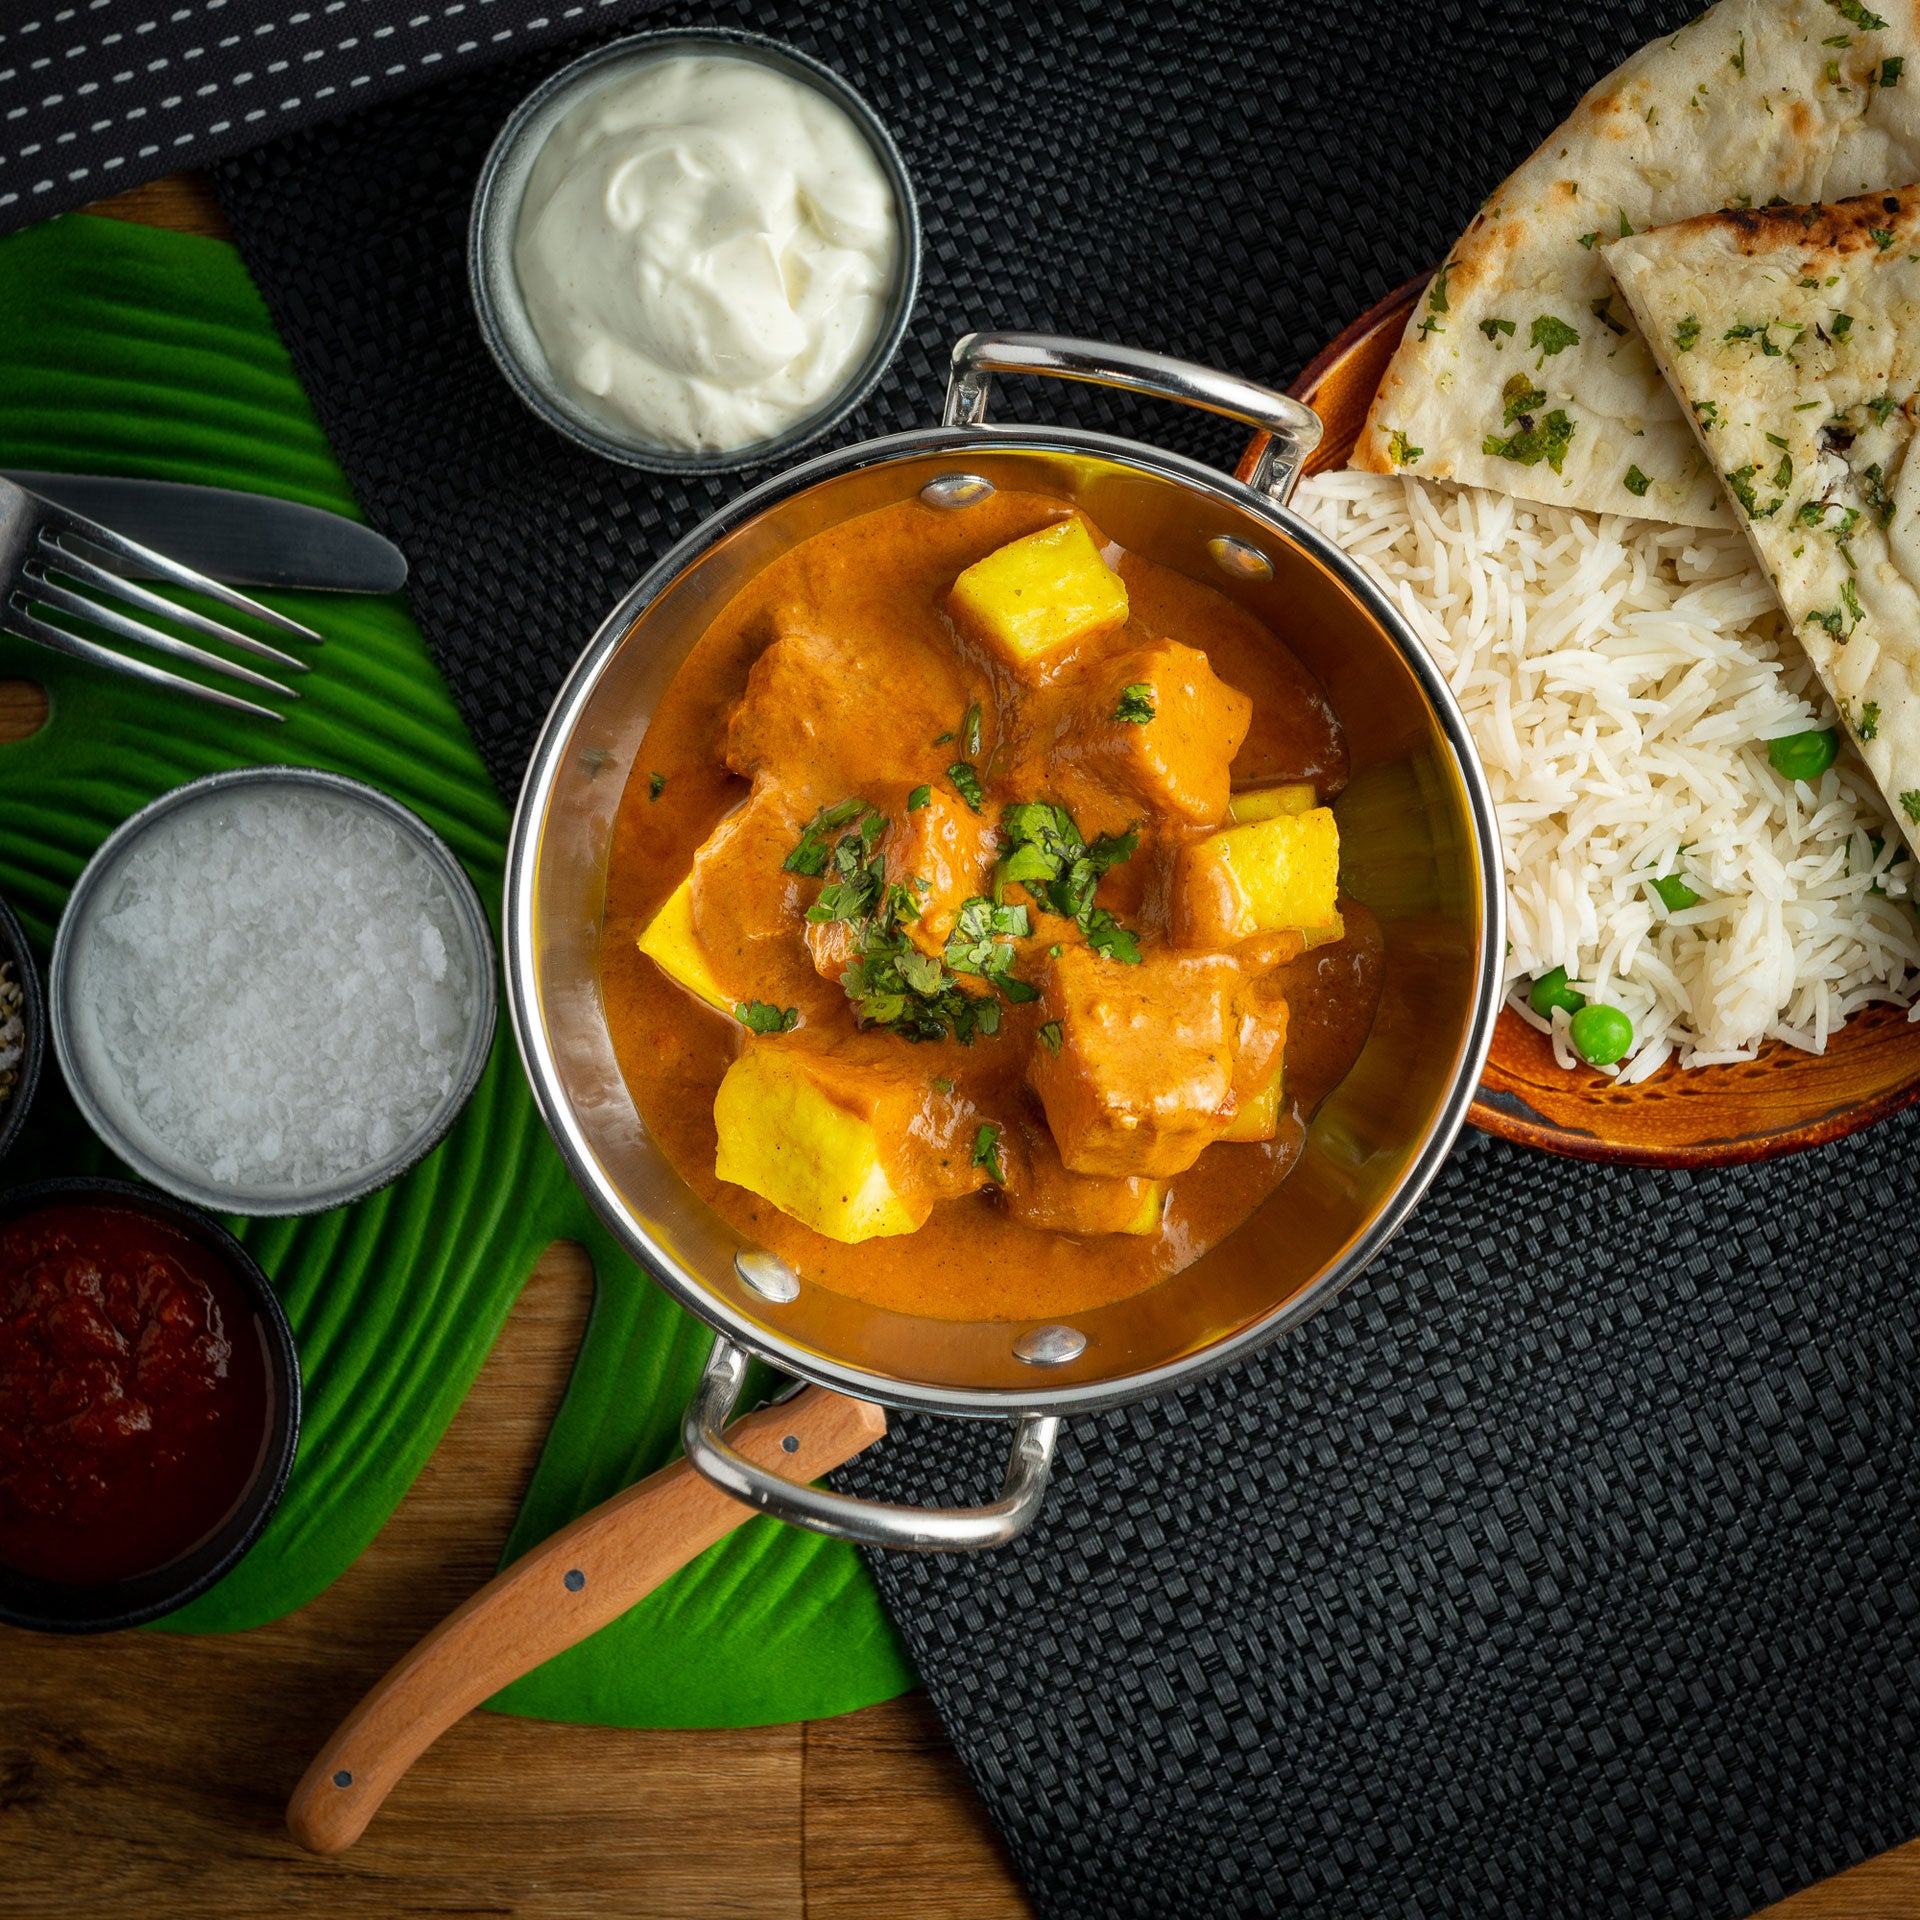 Eating healthy with Indian food